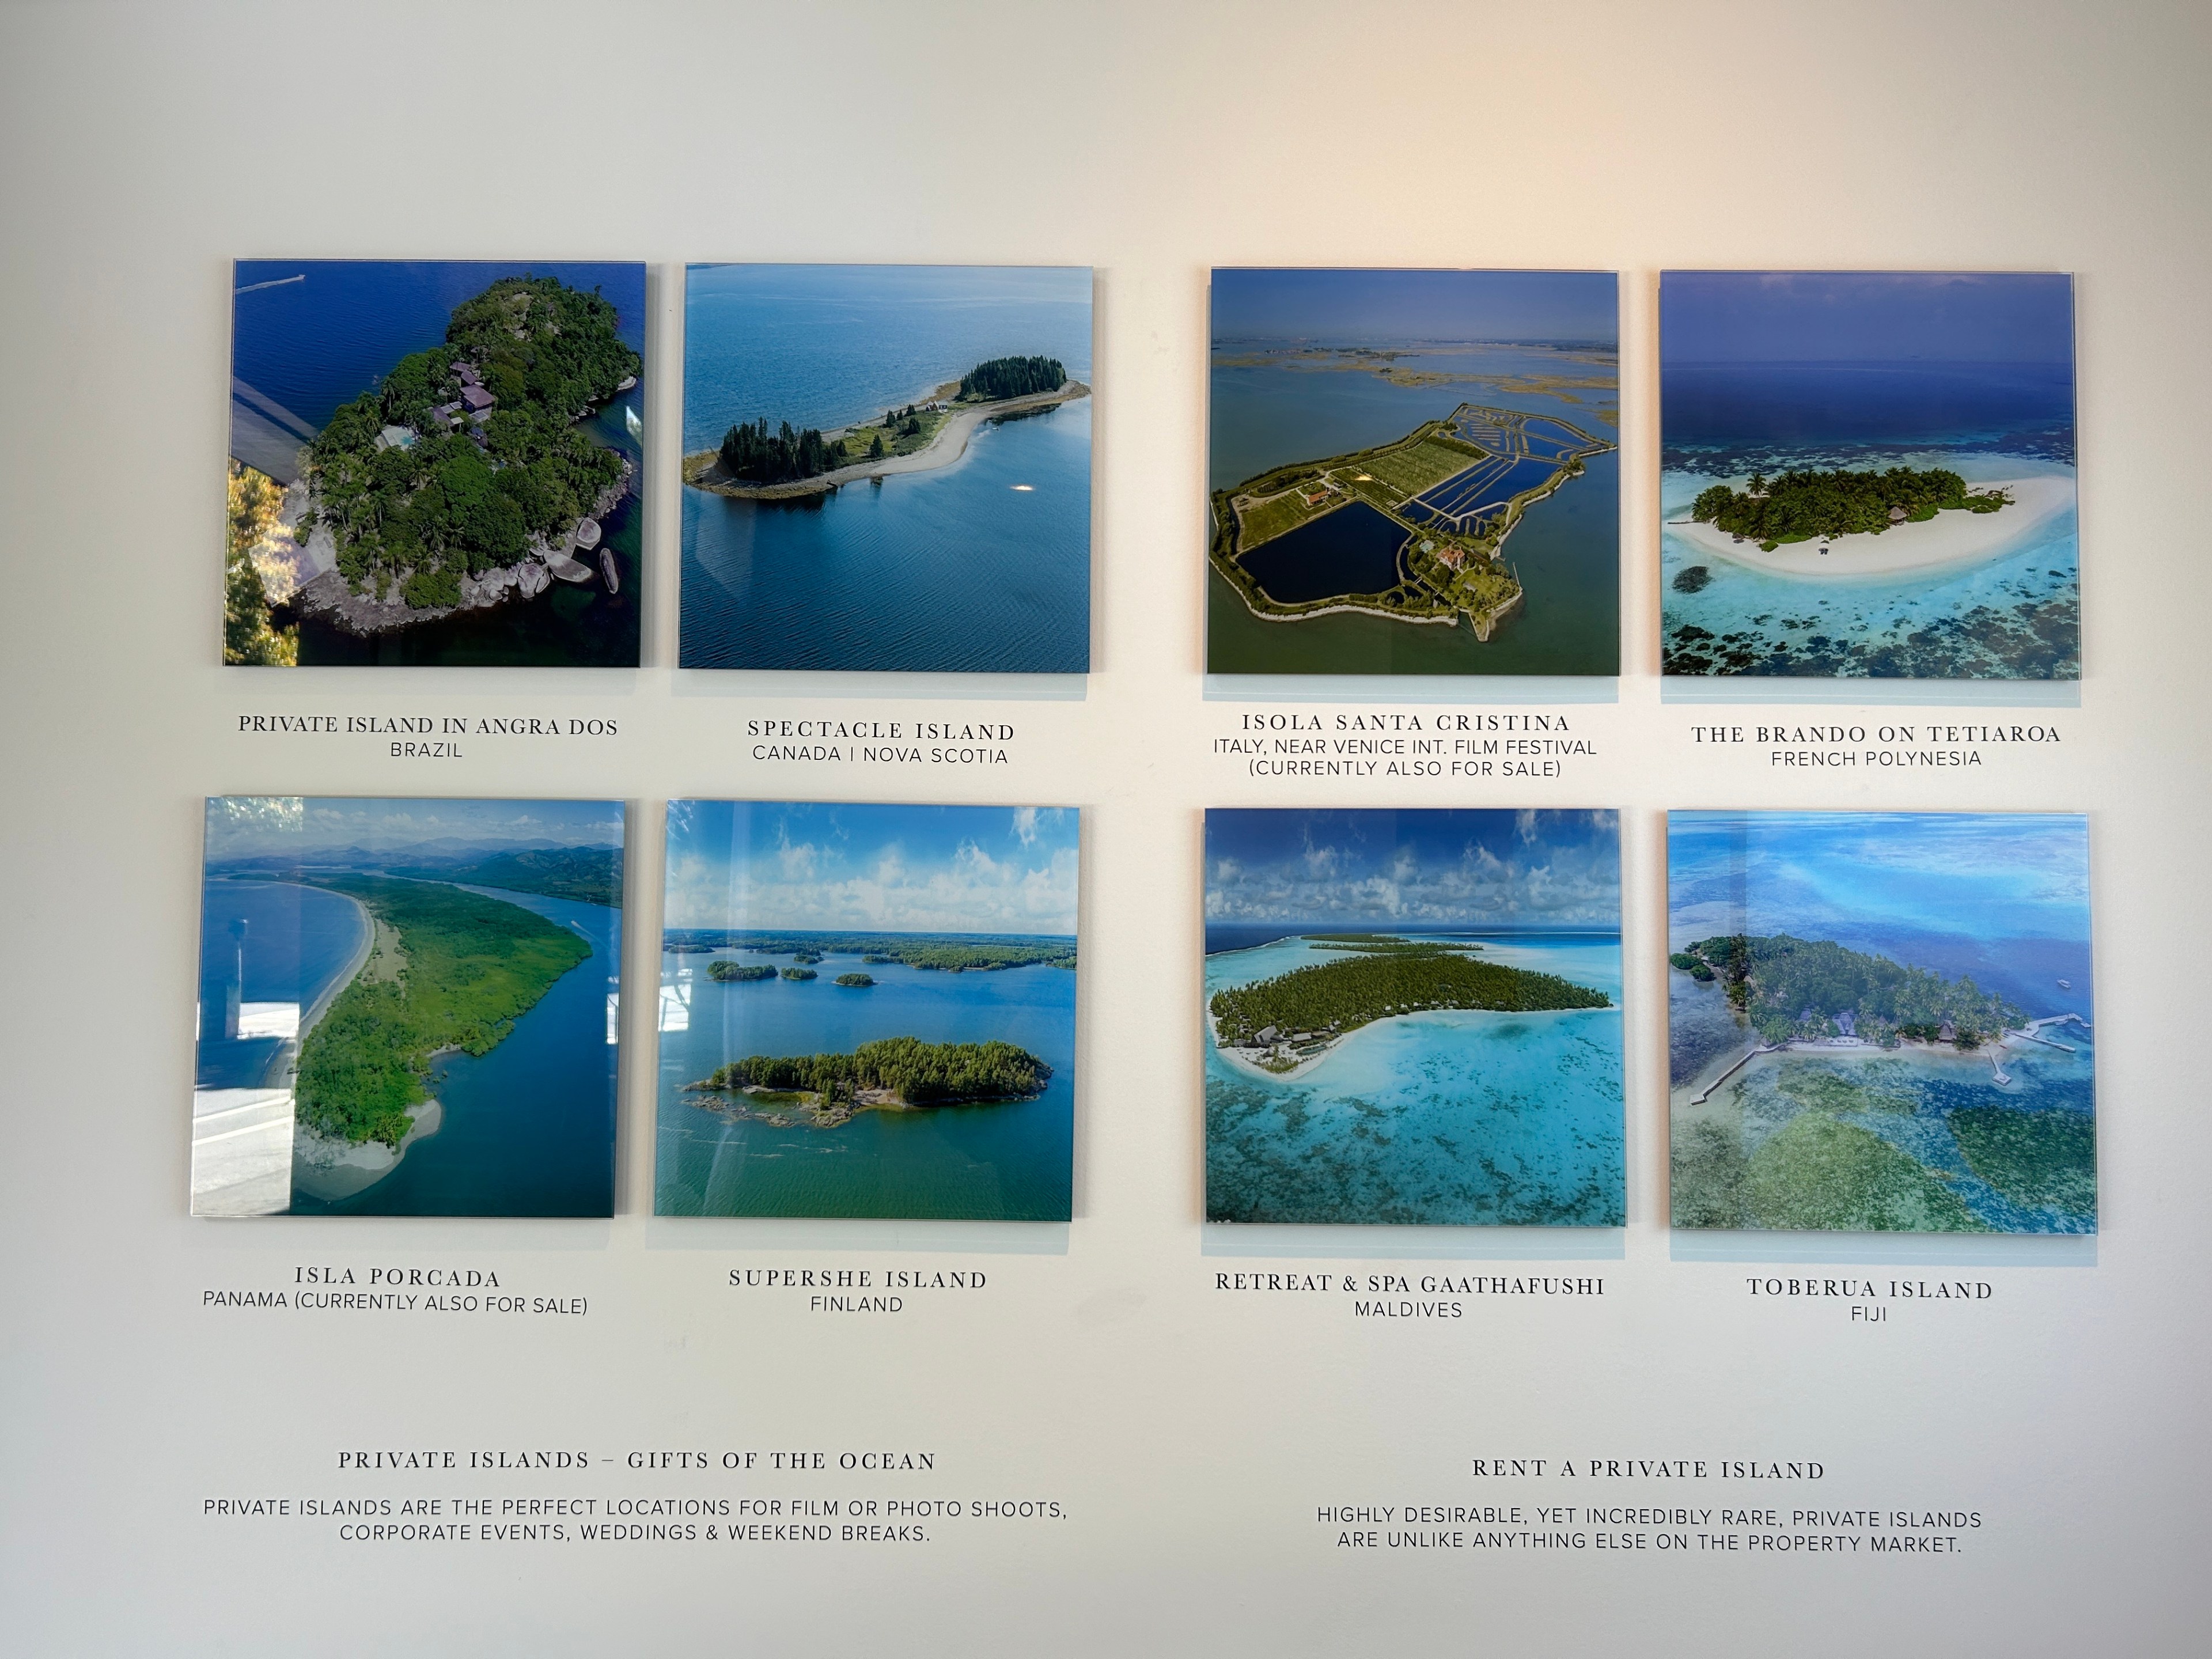 gallery-style, wall-mounted displays of available island properties showing eight tropical locations